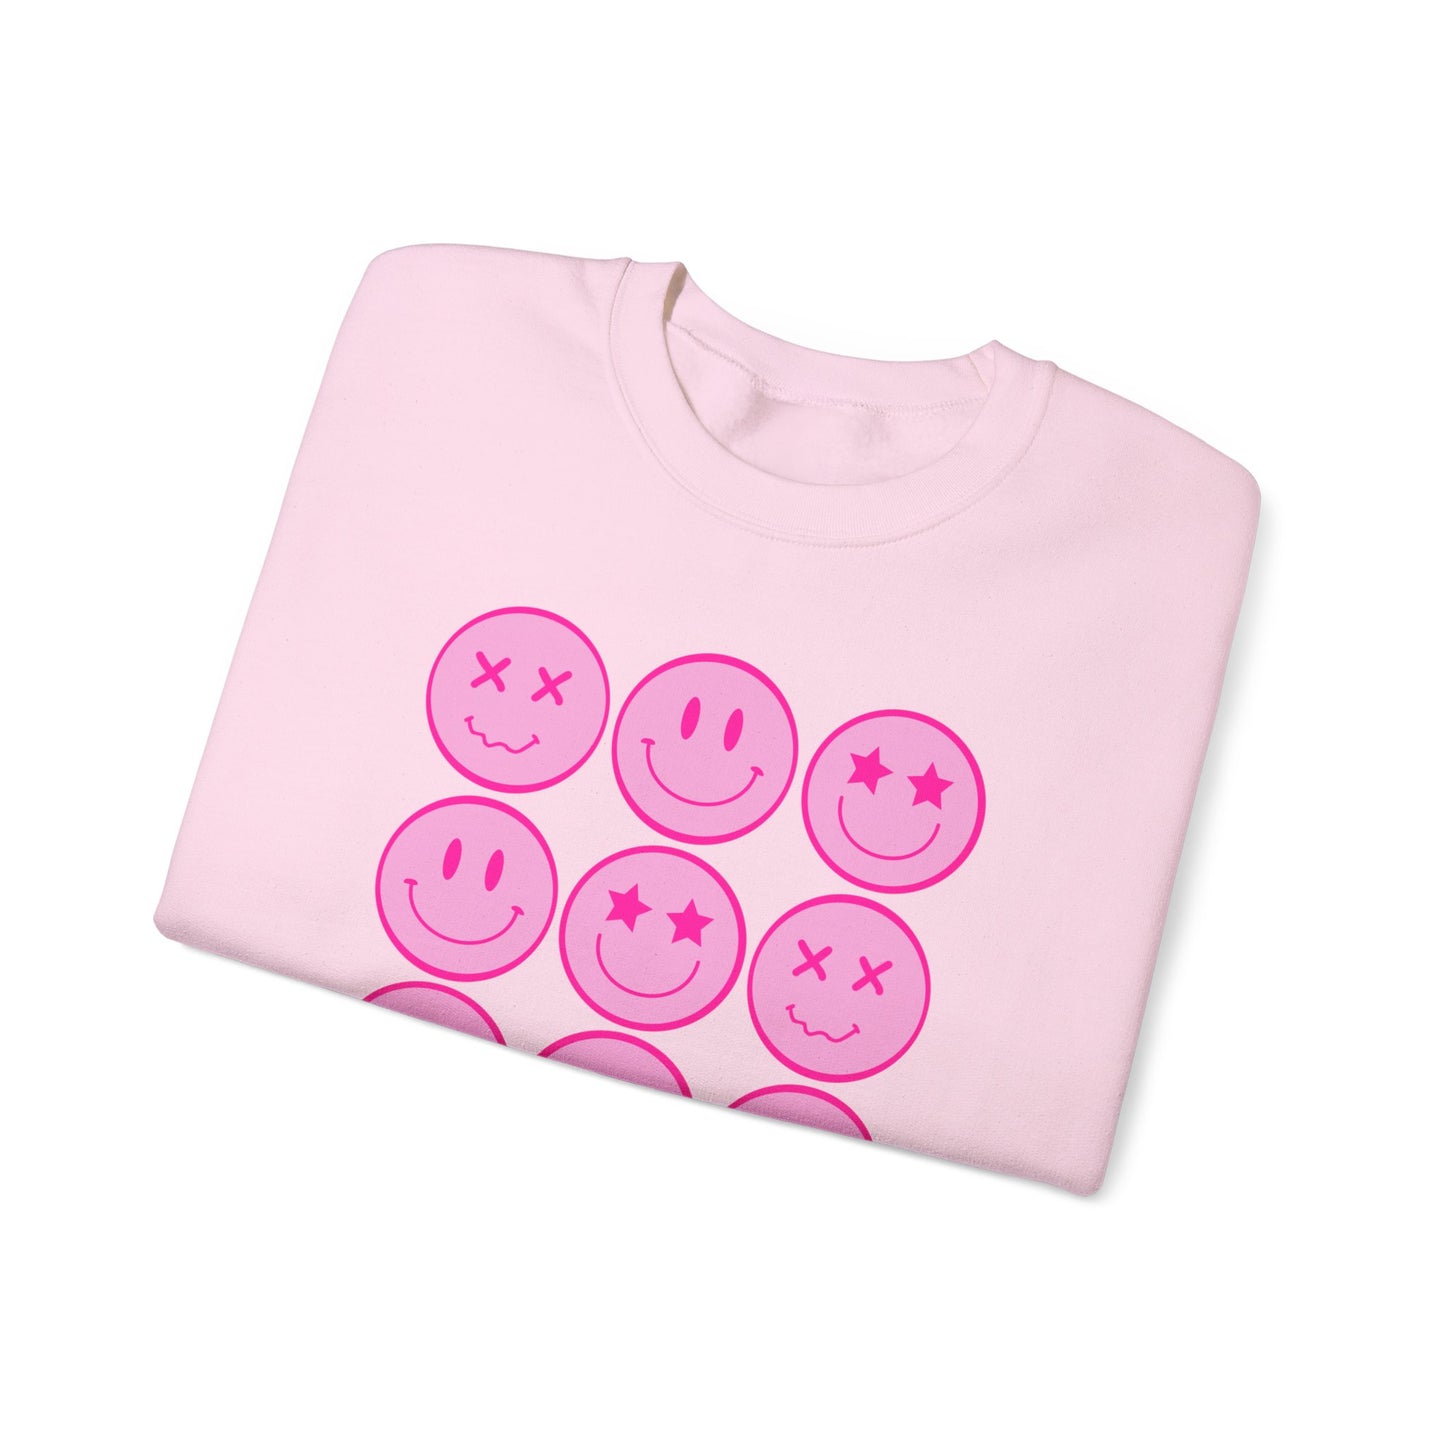 Smiley Sweater Pink